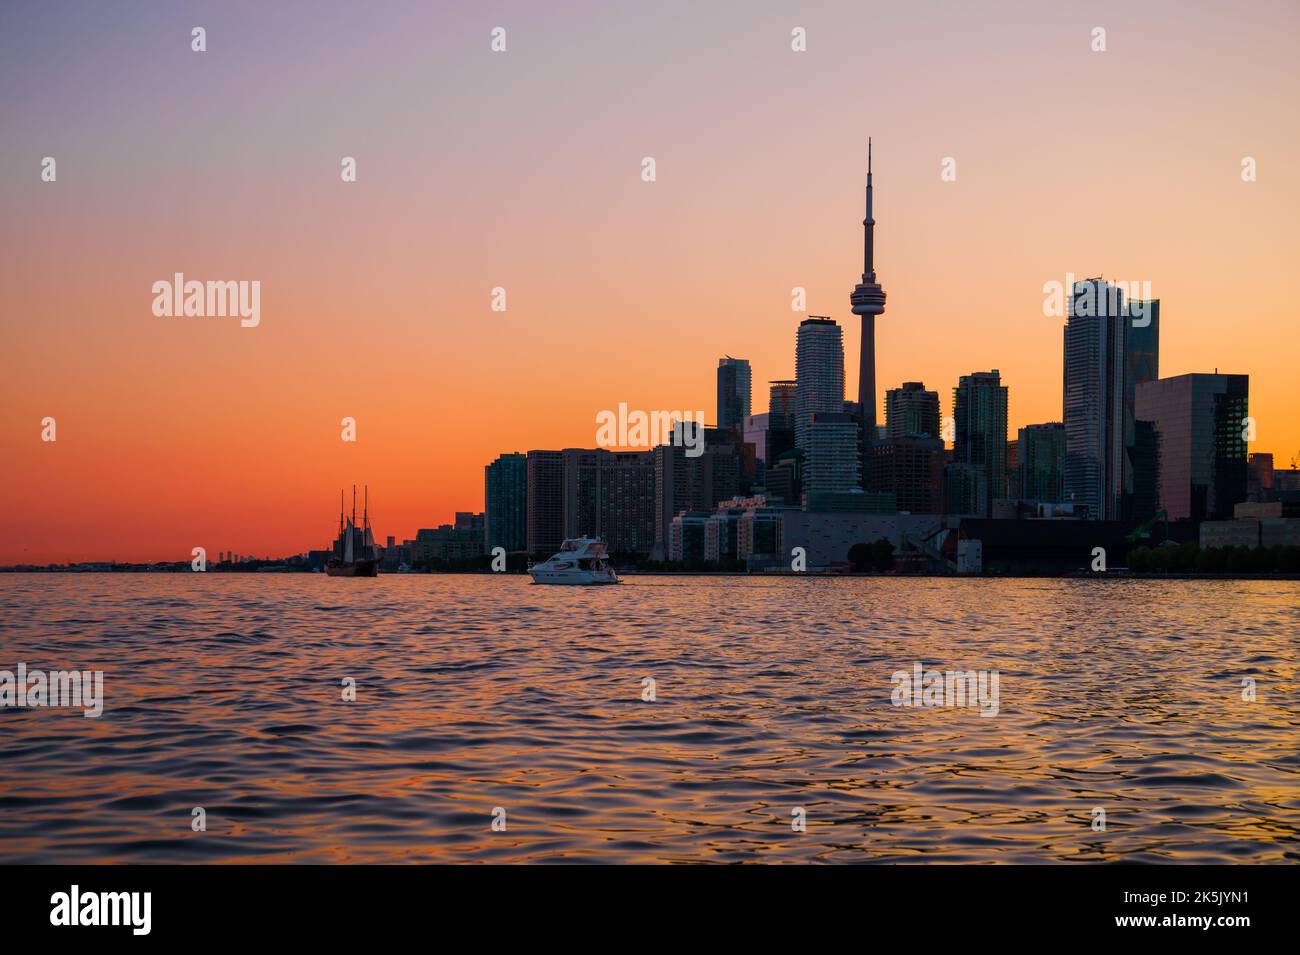 Toronto downtown cityscape with skyscrapers, white yacht, old sail ship and amazing color sunset sky. Travel and transportation Stock Photo